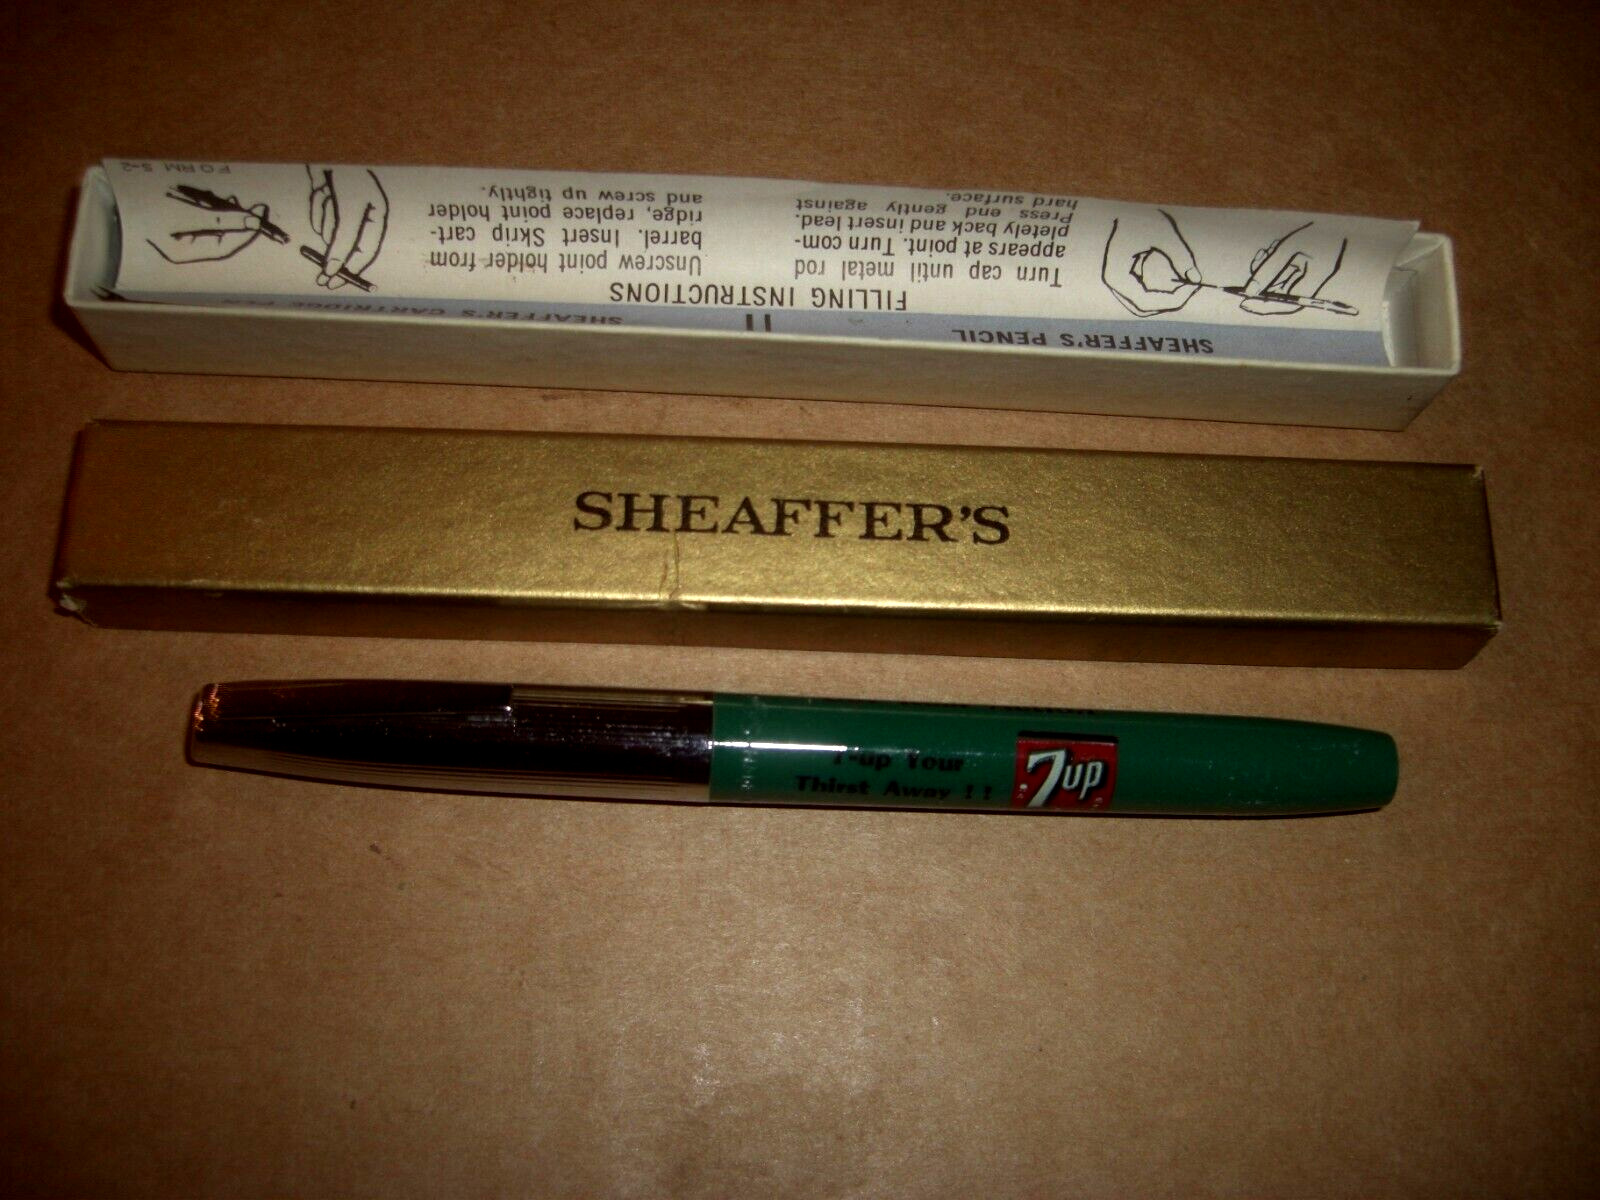 7up Sheaffer\'s Cartridge Ink Pen 7up Your Thirst Away Get Real Action 1960s